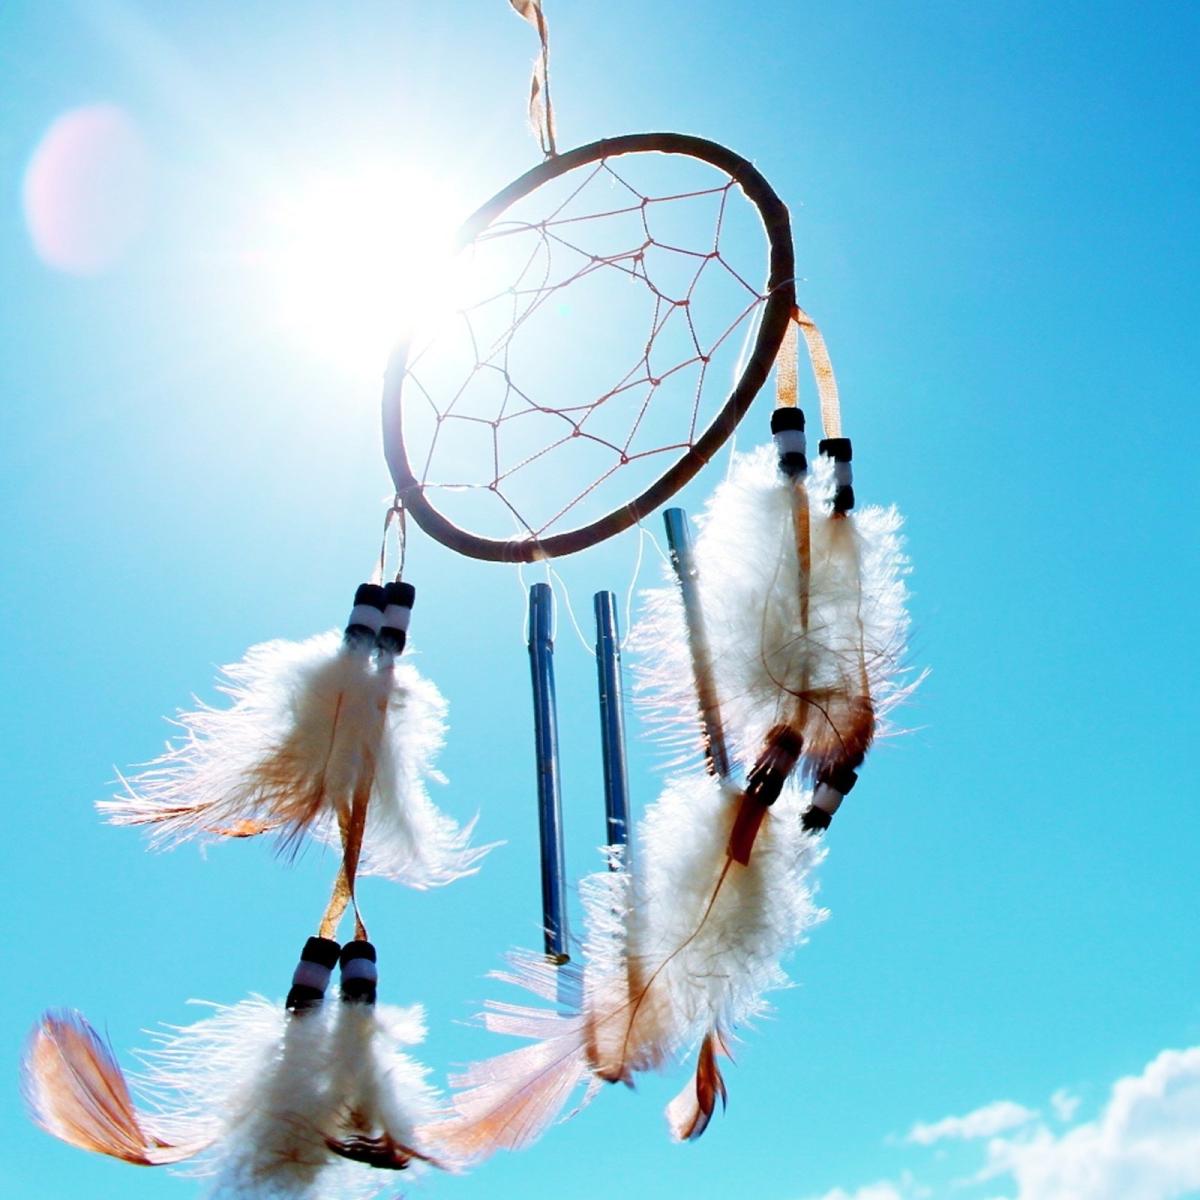 Photo of a dream catcher with a blue sky background.